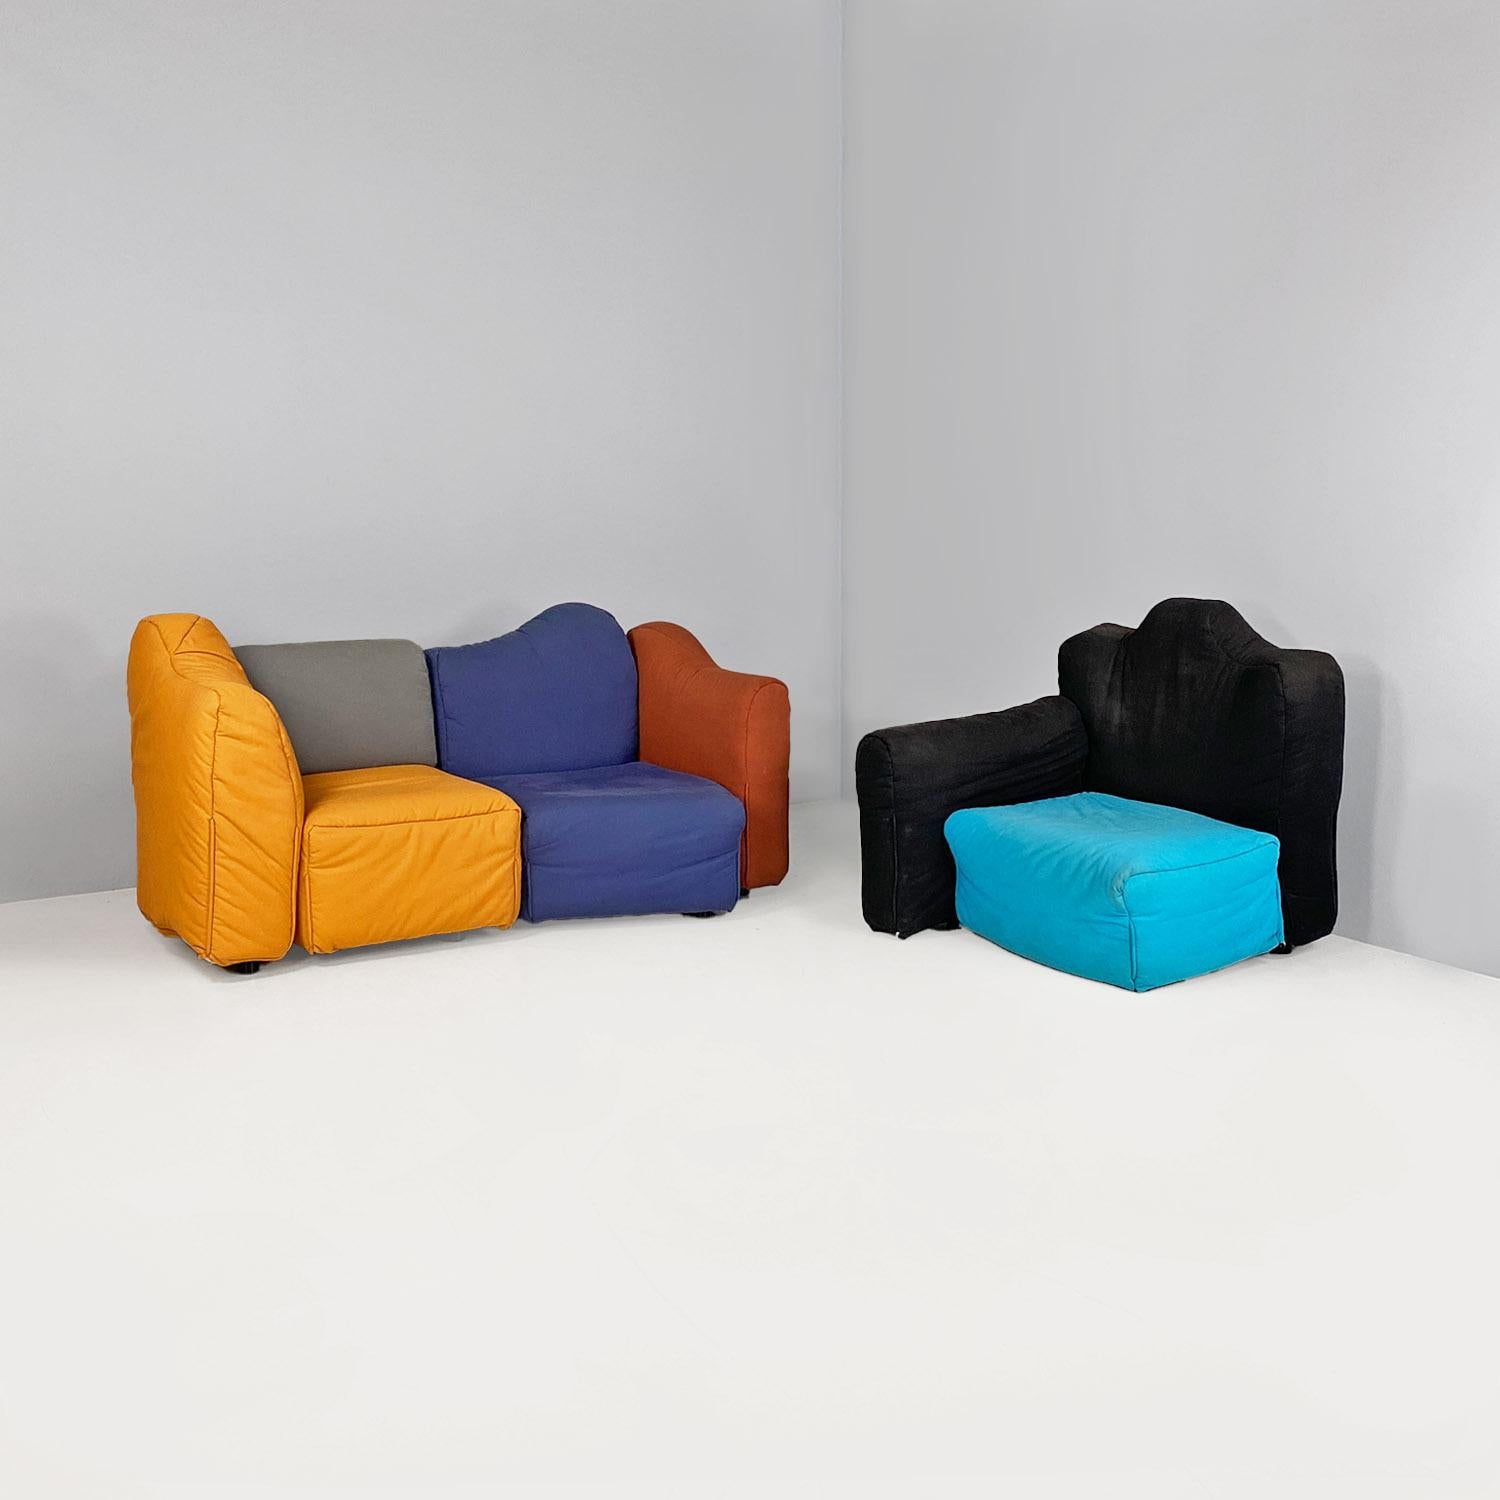 Italian modern modular Cannaregio sofa by Gaetano Pesce for Cassina, 1987
Cannaregio model sofa composed of three modules that can be positioned as desired, united or distant. The supporting structure of the sofa is made of plywood with polyurethane